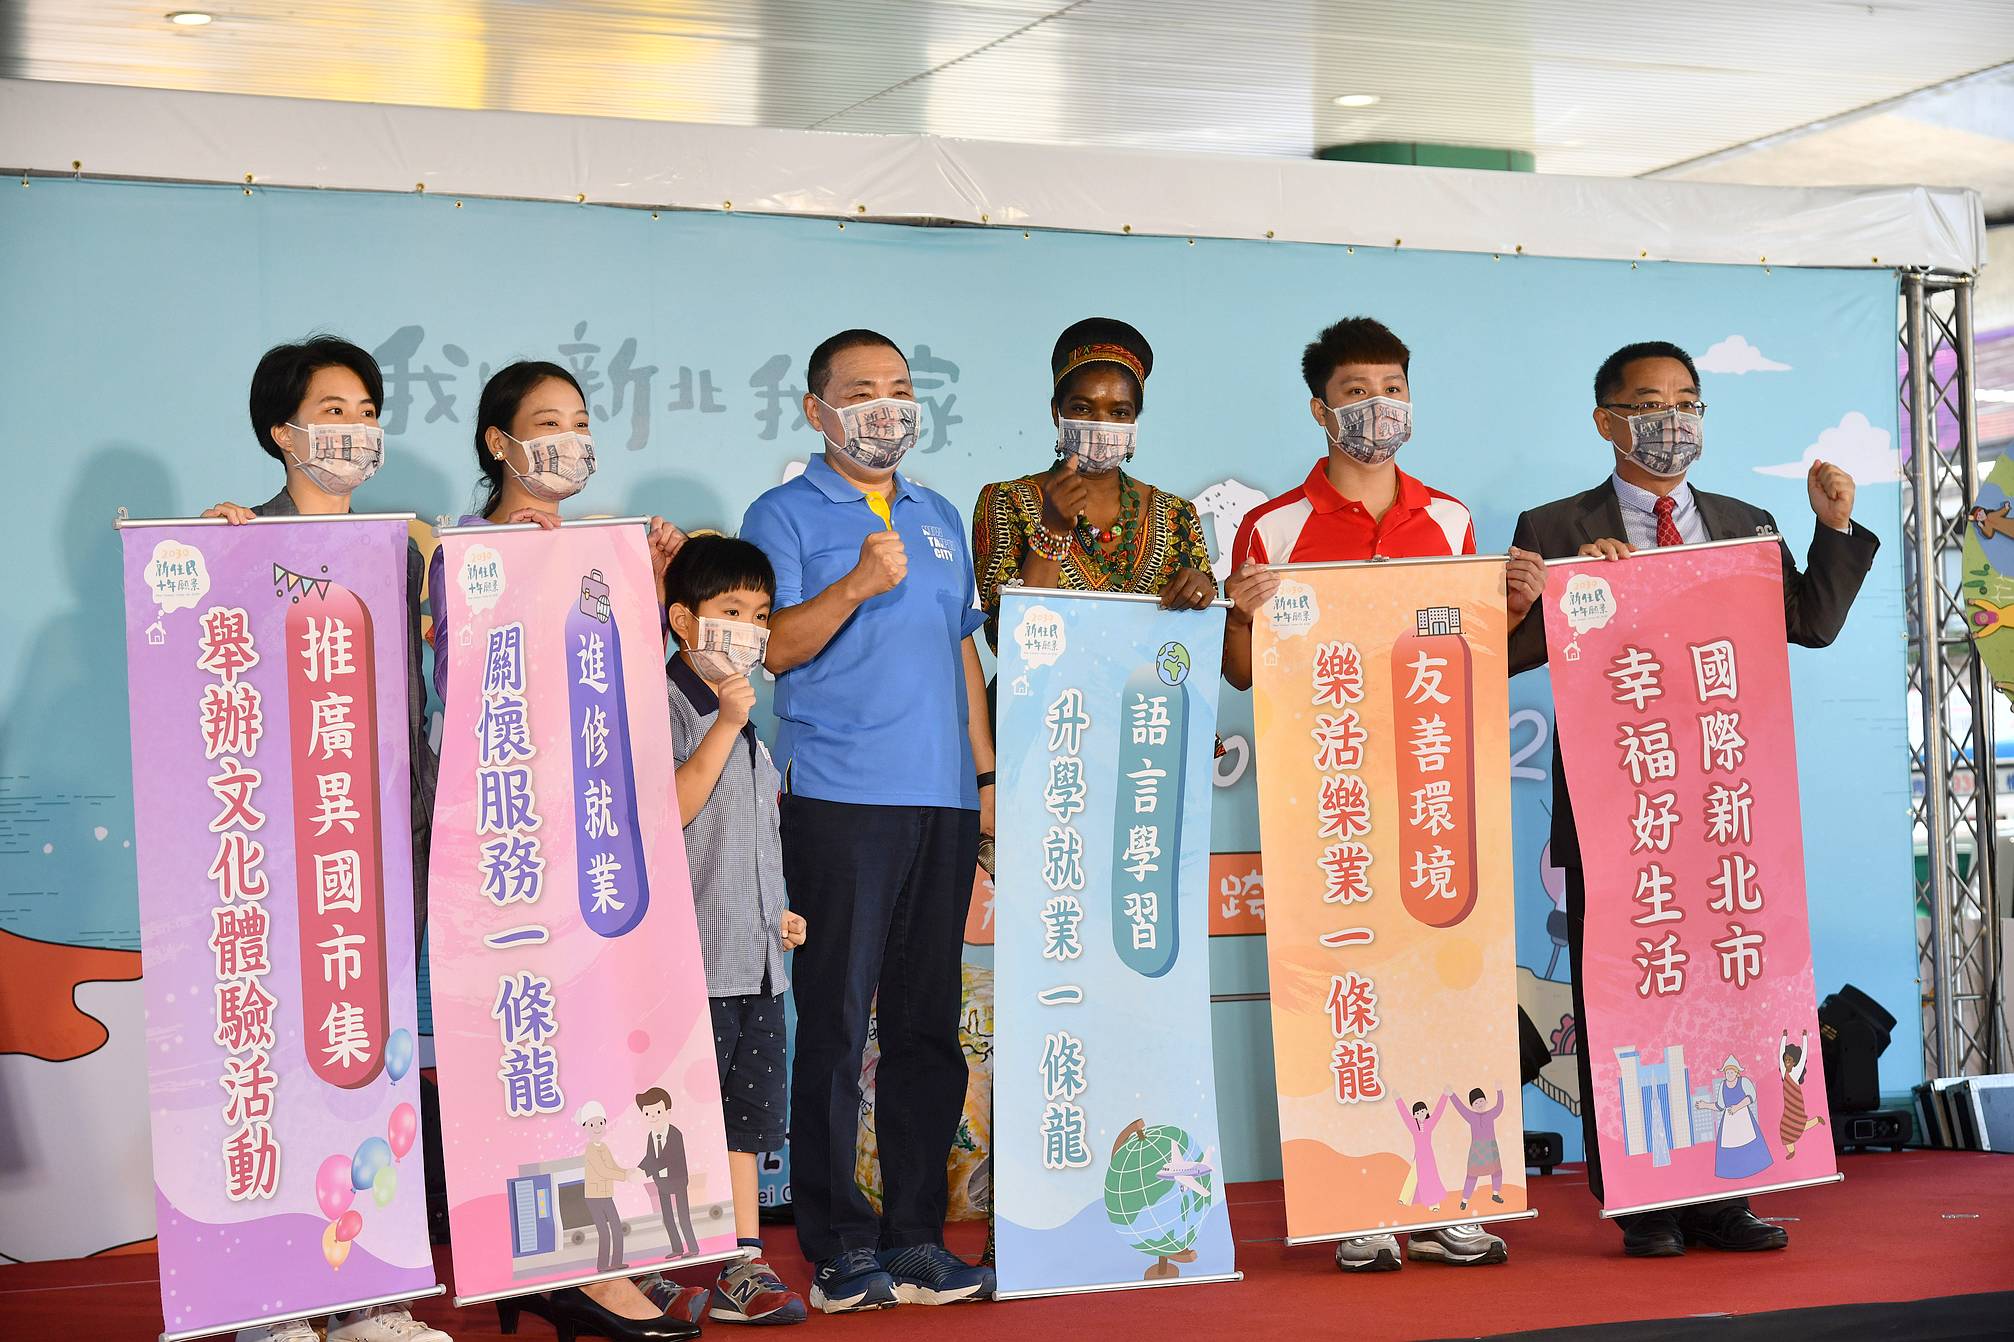 “10-Year Vision for new immigrants” was launched in the New Taipei City. (Photo / Provided by the New Taipei City Government)